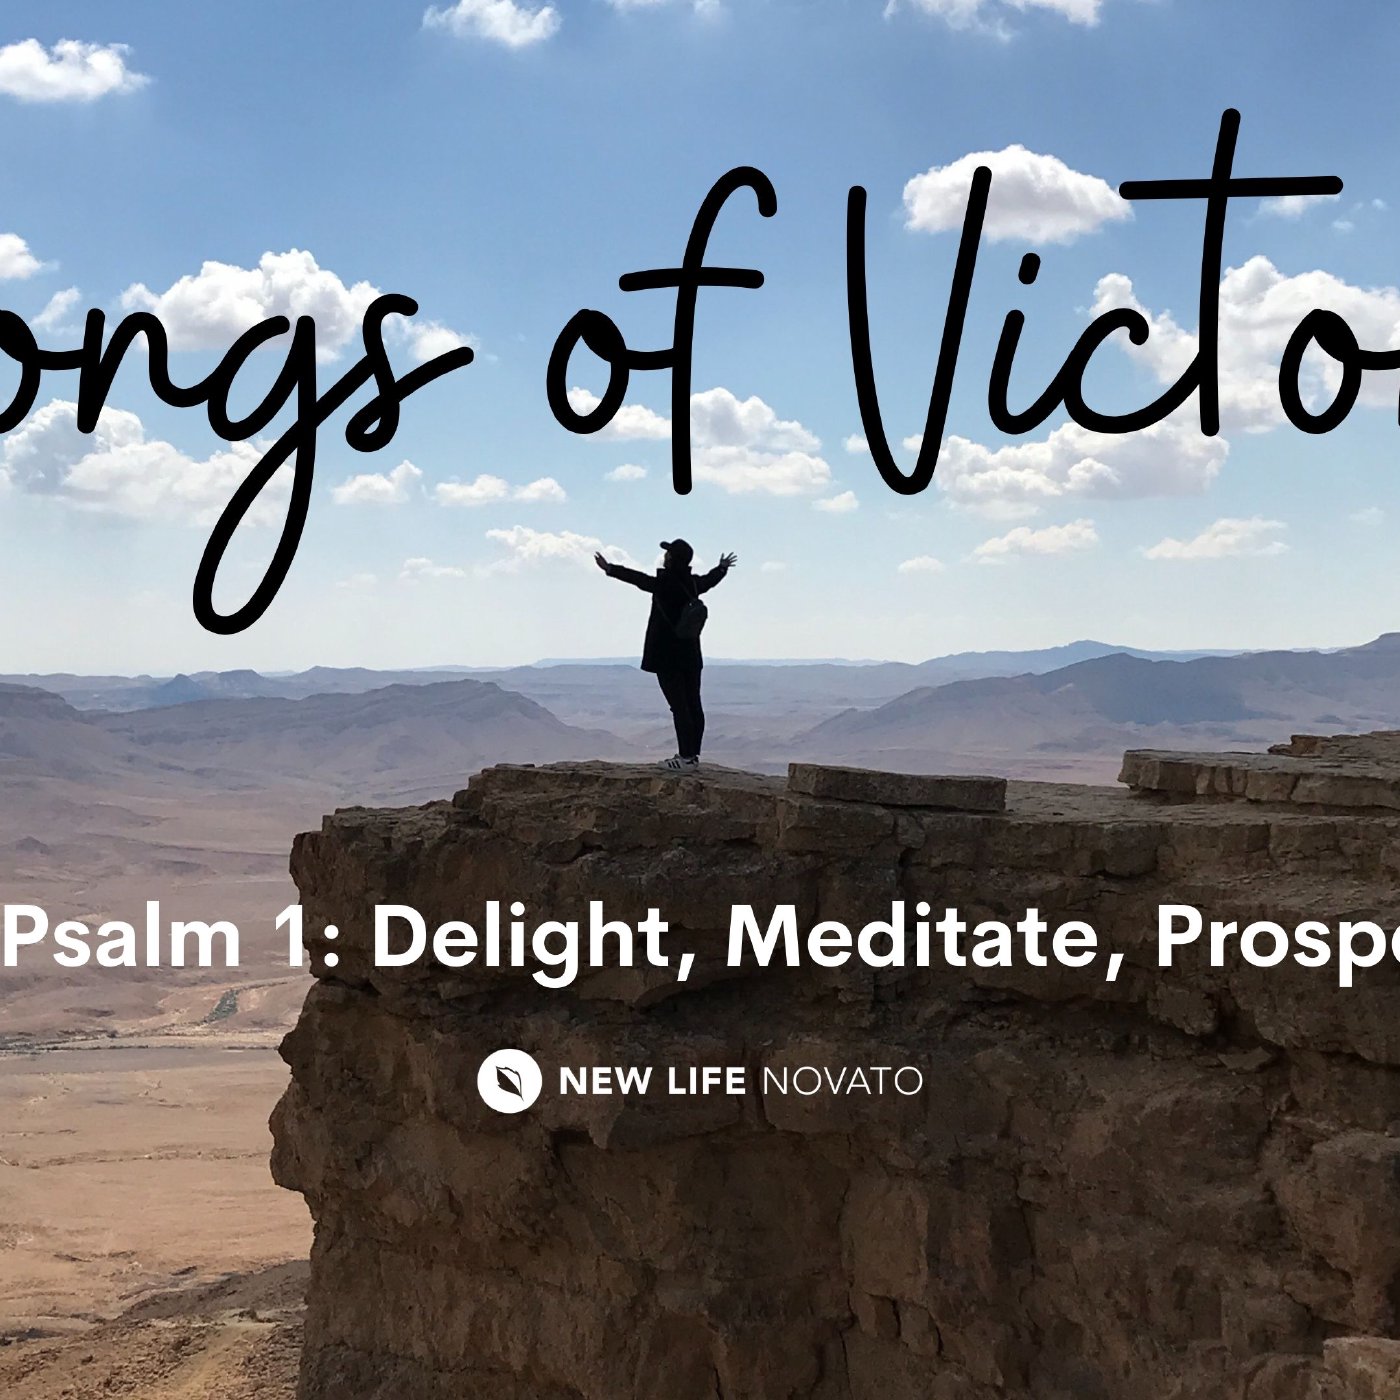 Delight, Meditate, and Prosper - Songs of Victory Part 1